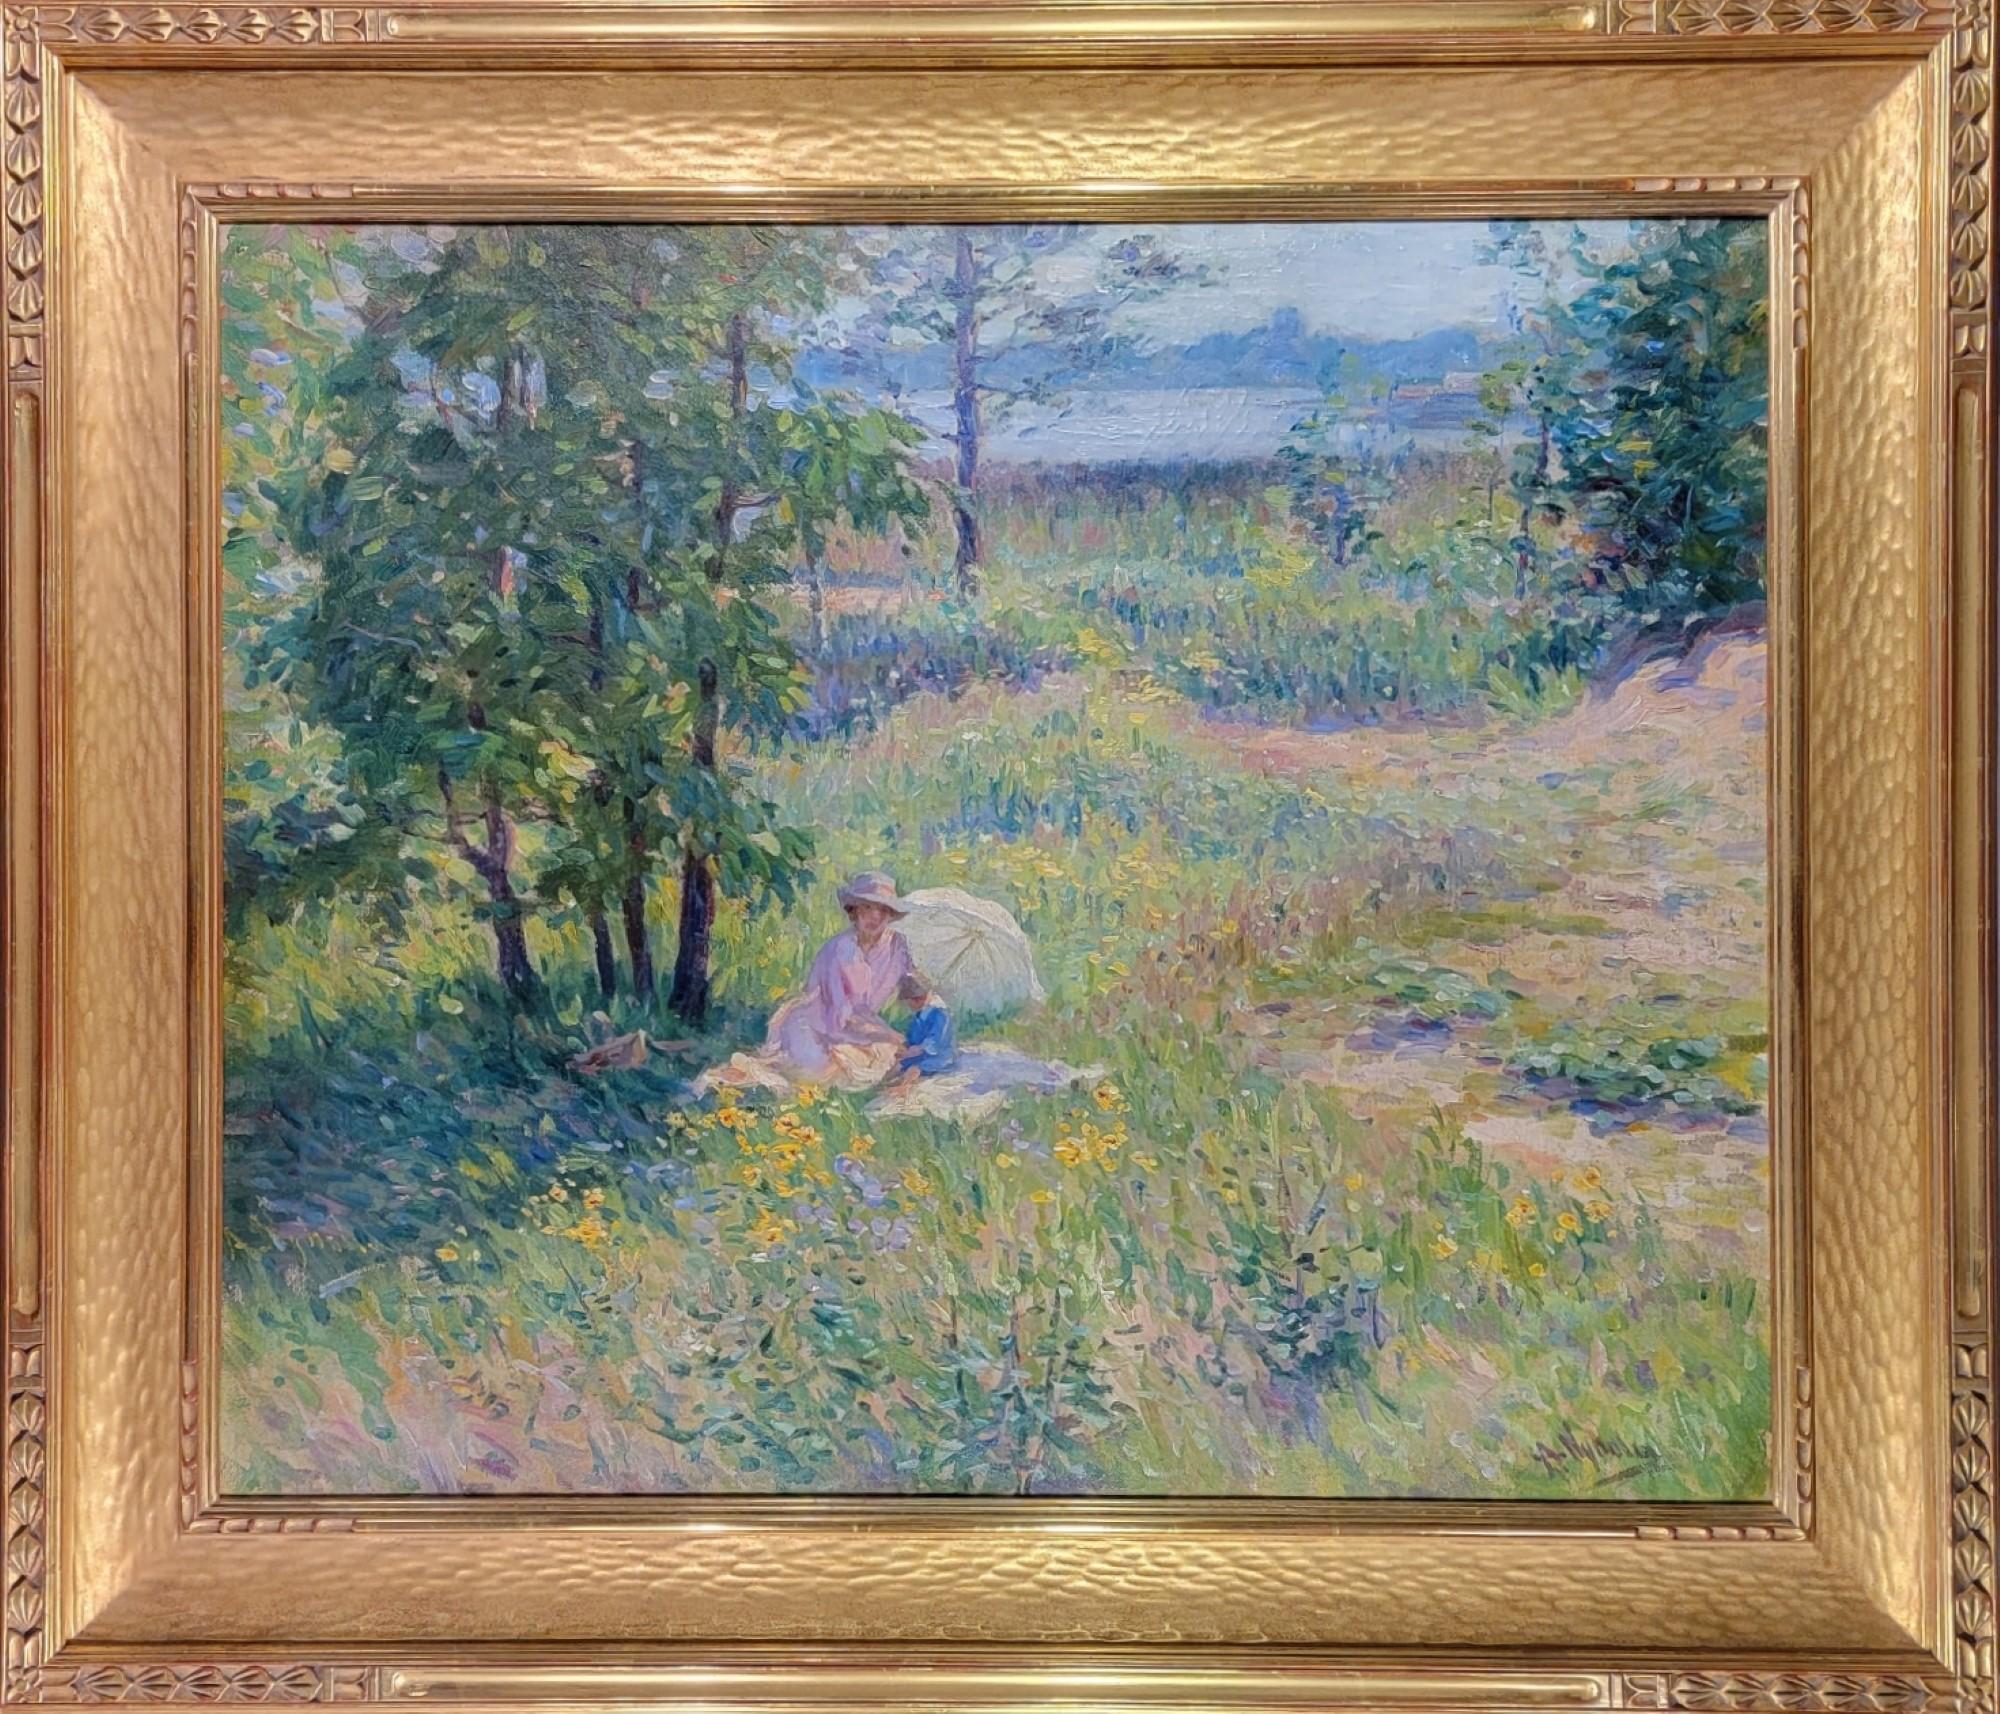 Arvid Frederick Nyholm (Swedish-American, 1866-1937)

Signed: A Nyholm (Lower, Right and Lower, Left)

" Mother and Child in a Landscape ", circa 1910-1920

Oil on Canvas 

25" x 30"

Housed in a 2 1/2" Contemporary Period Style Frame in Gold